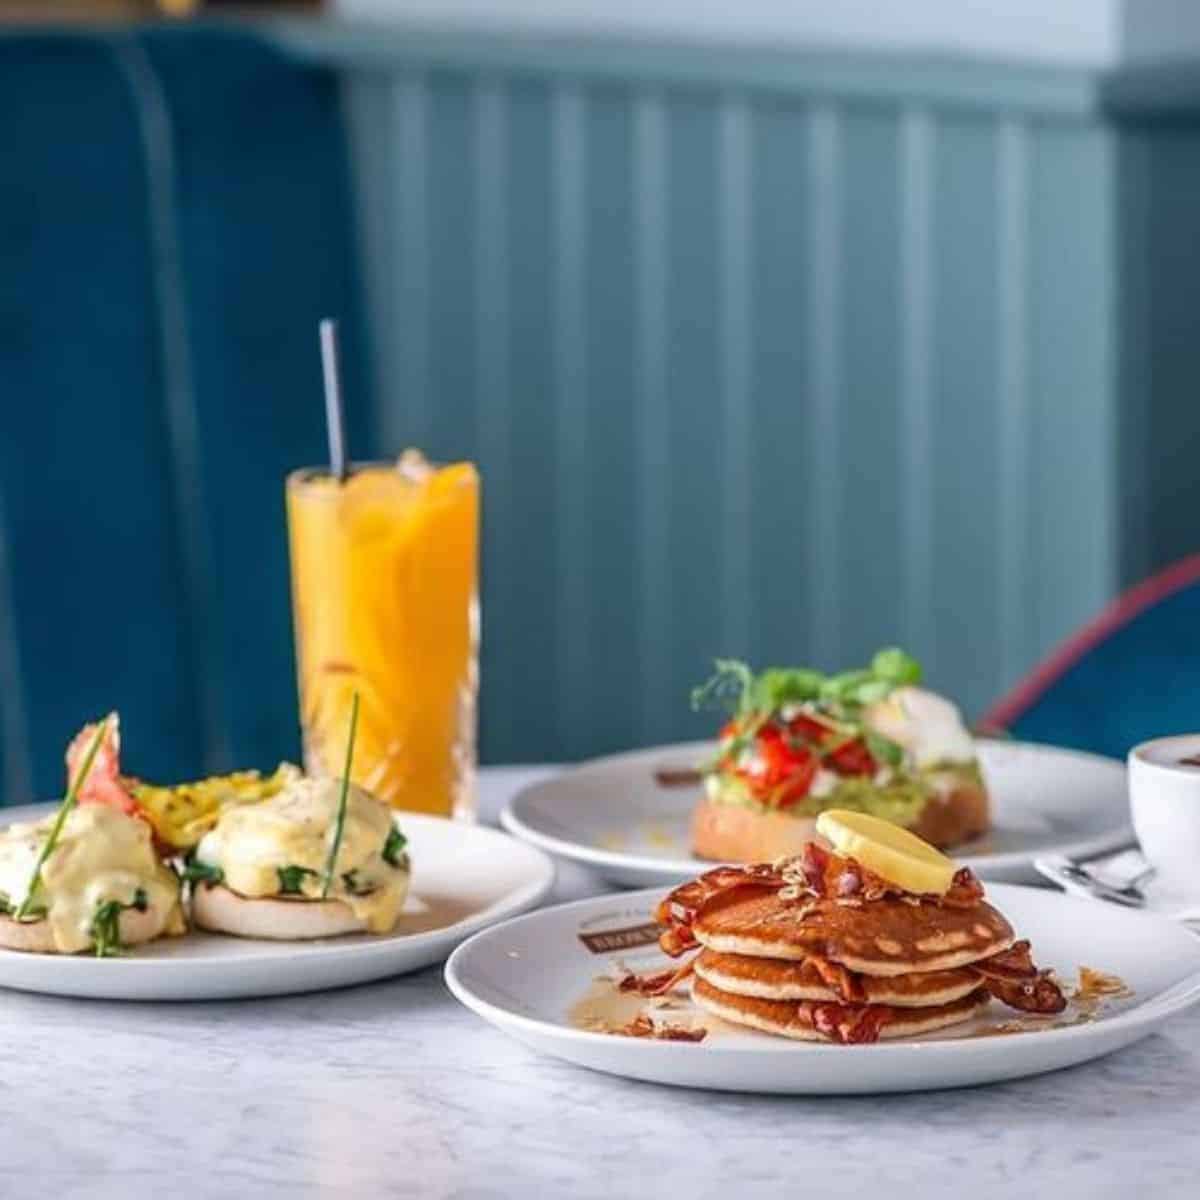 pancake stack and open faced sandwiches Browns Brighton bottomless brunch